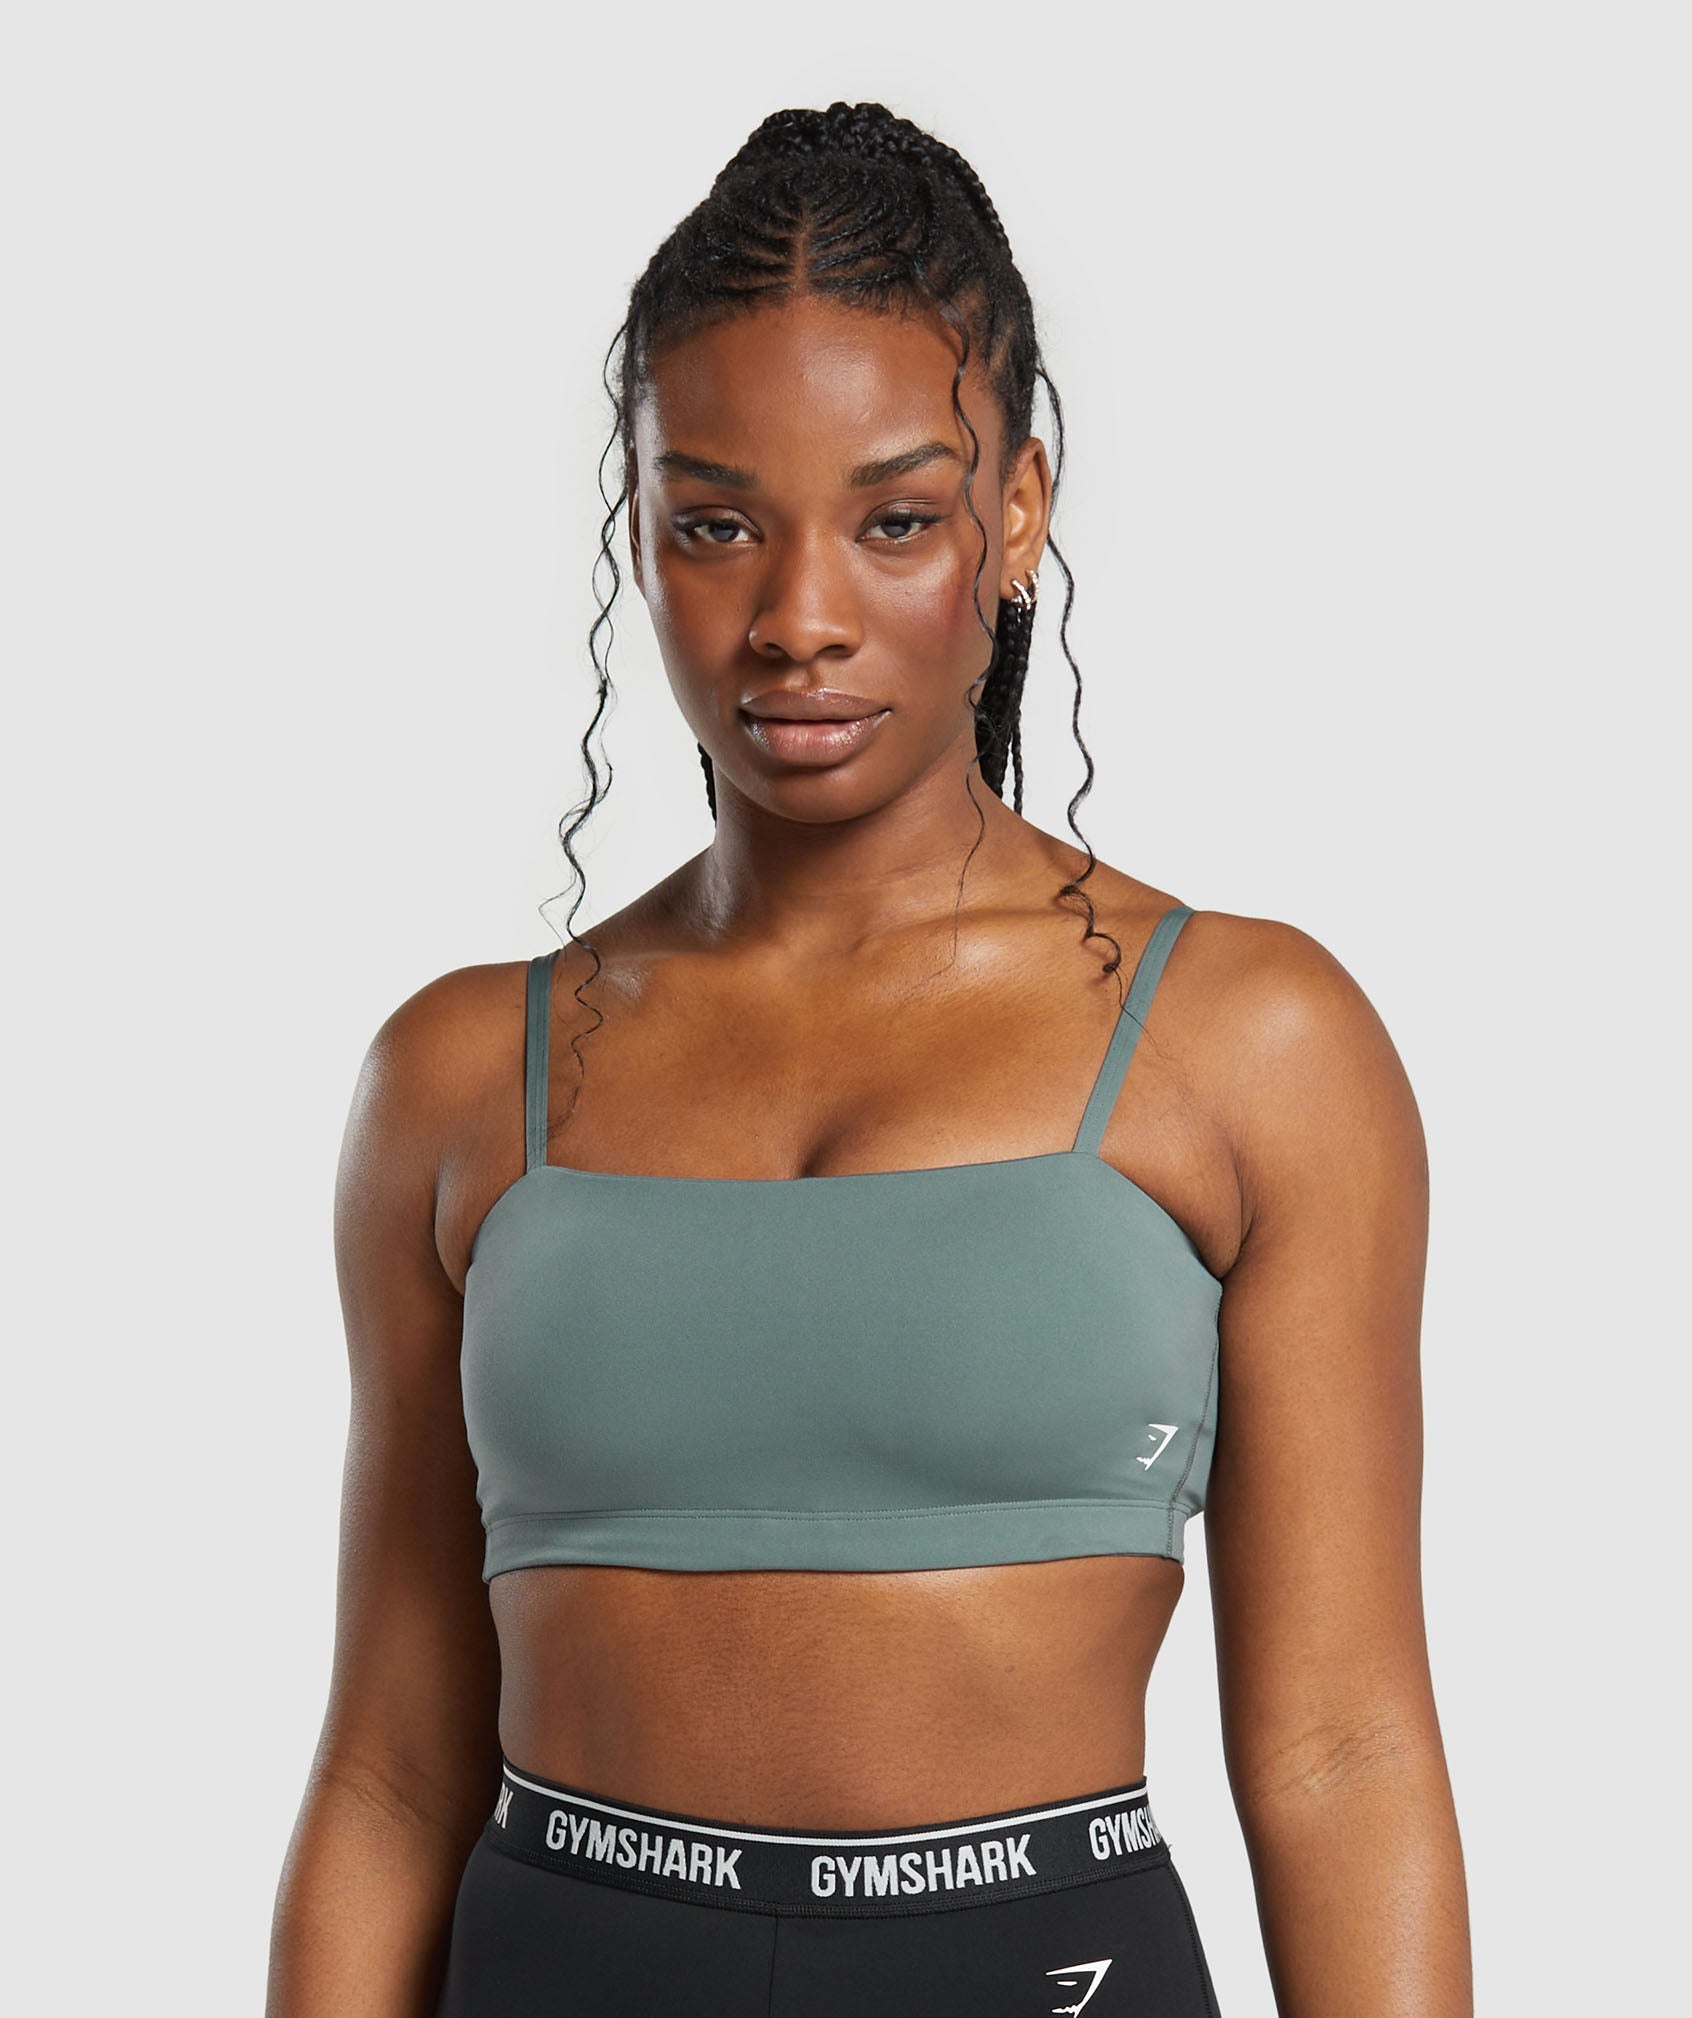 Bandeau Sports Bra in Cargo Teal is out of stock